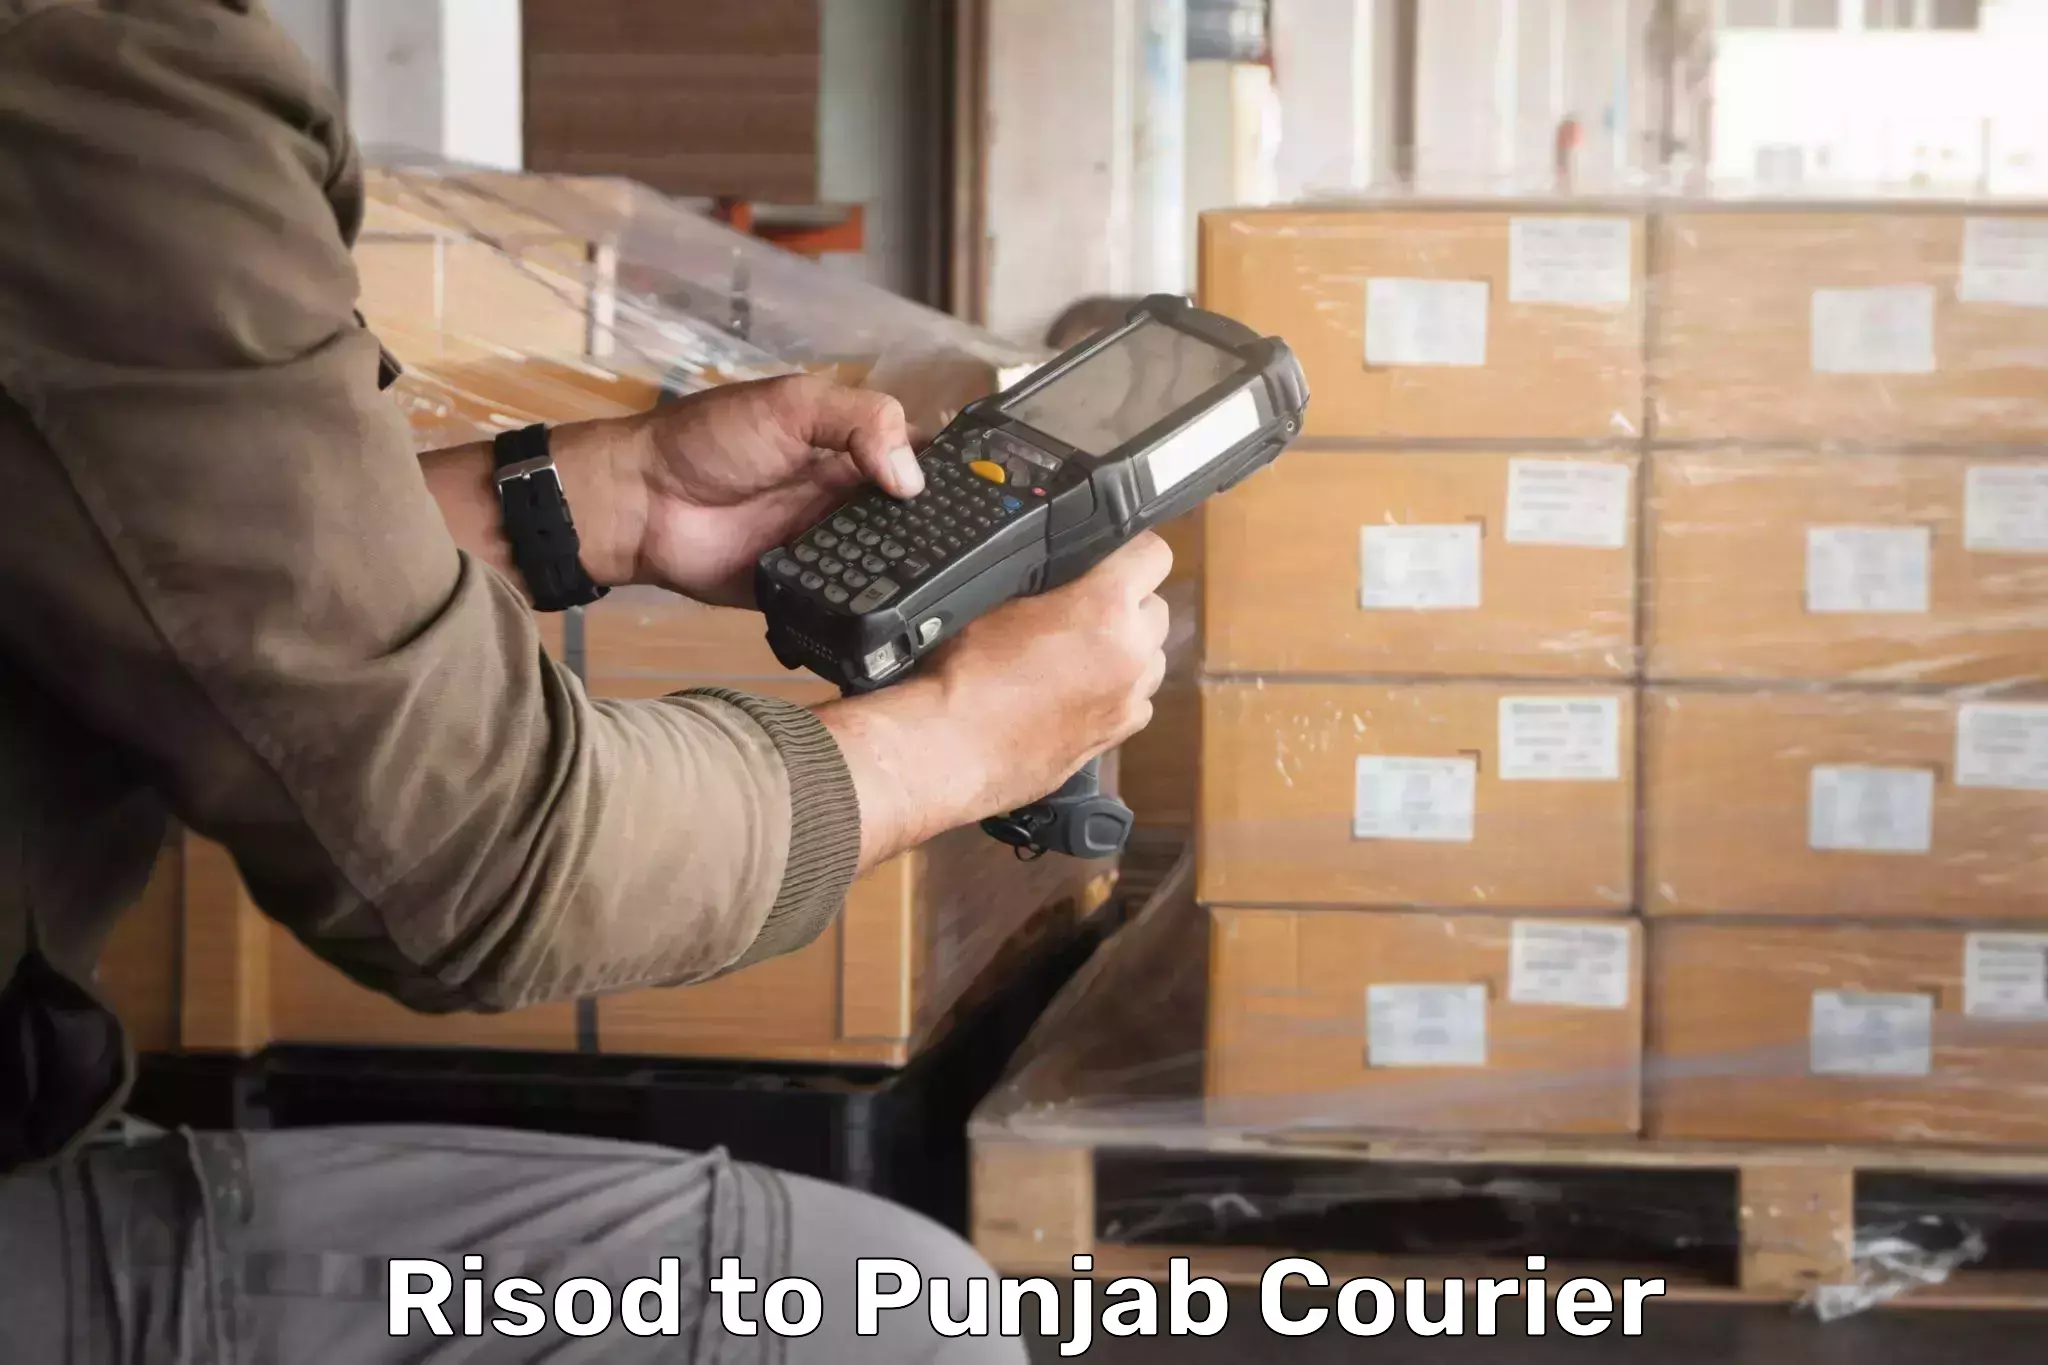 Premium courier services Risod to Mohali